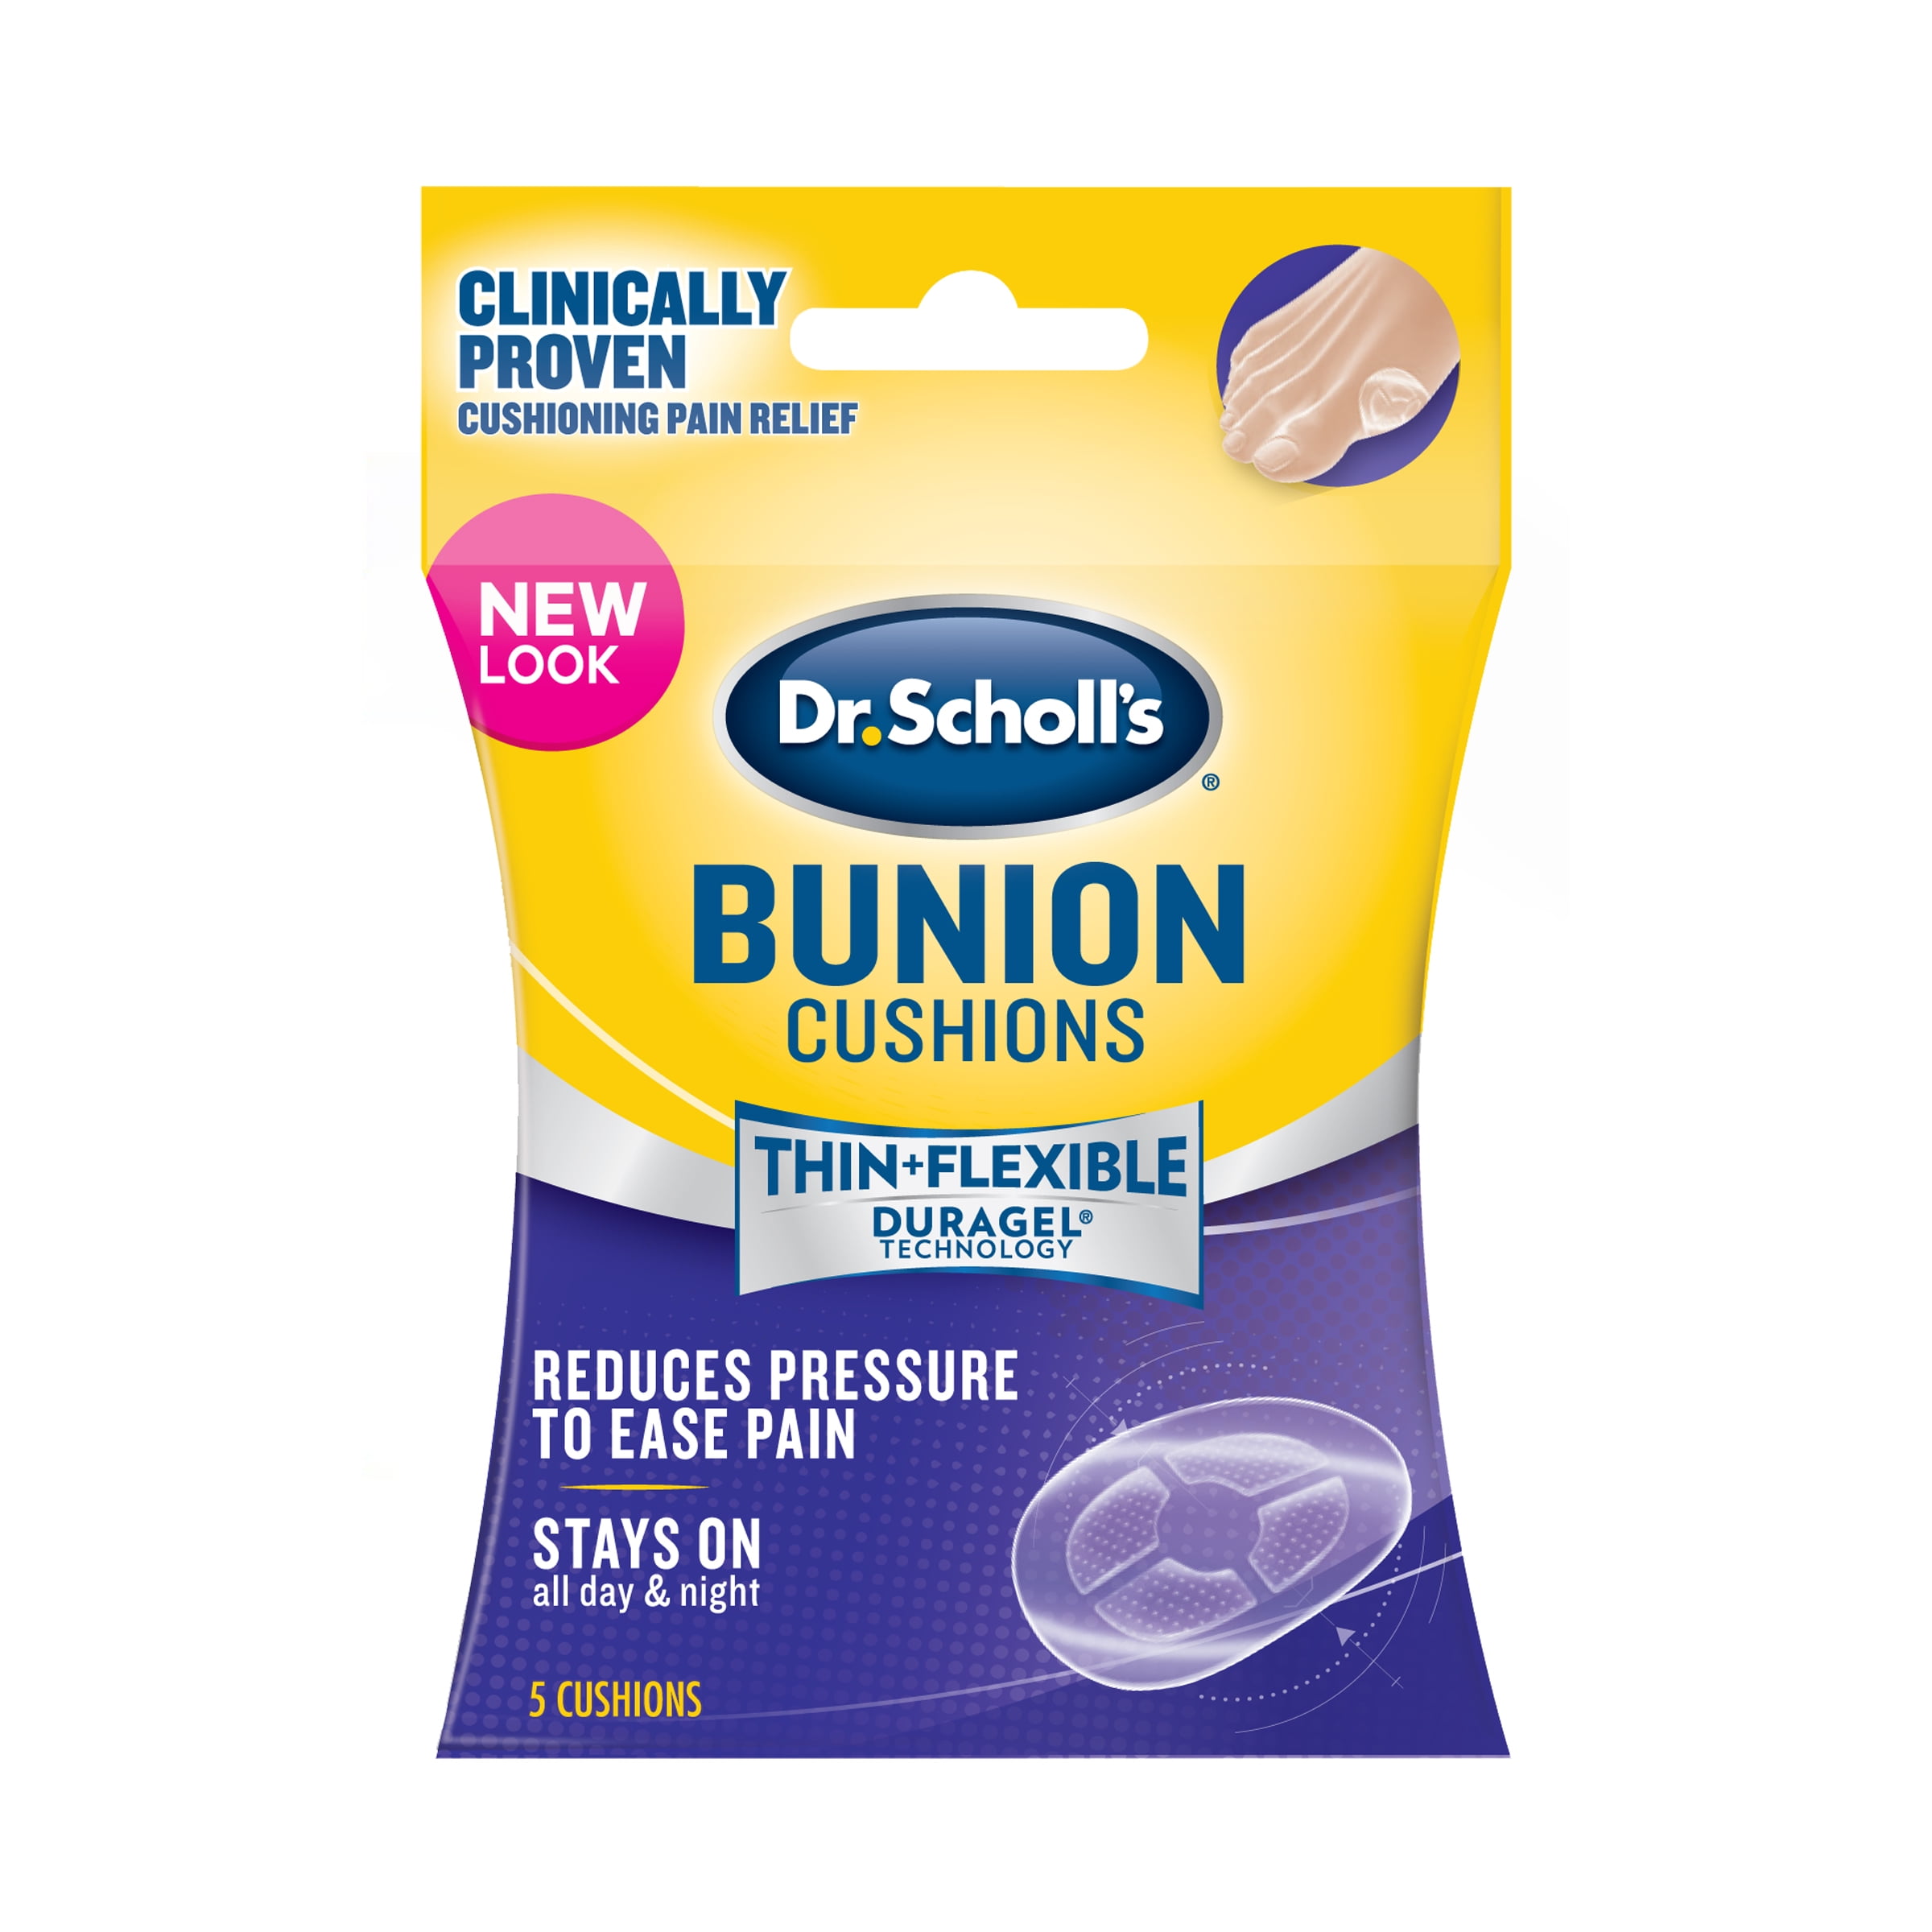 Dr. Scholl's Bunion Cushions with Duragel Technology (5ct) to Protect against Shoe Friction